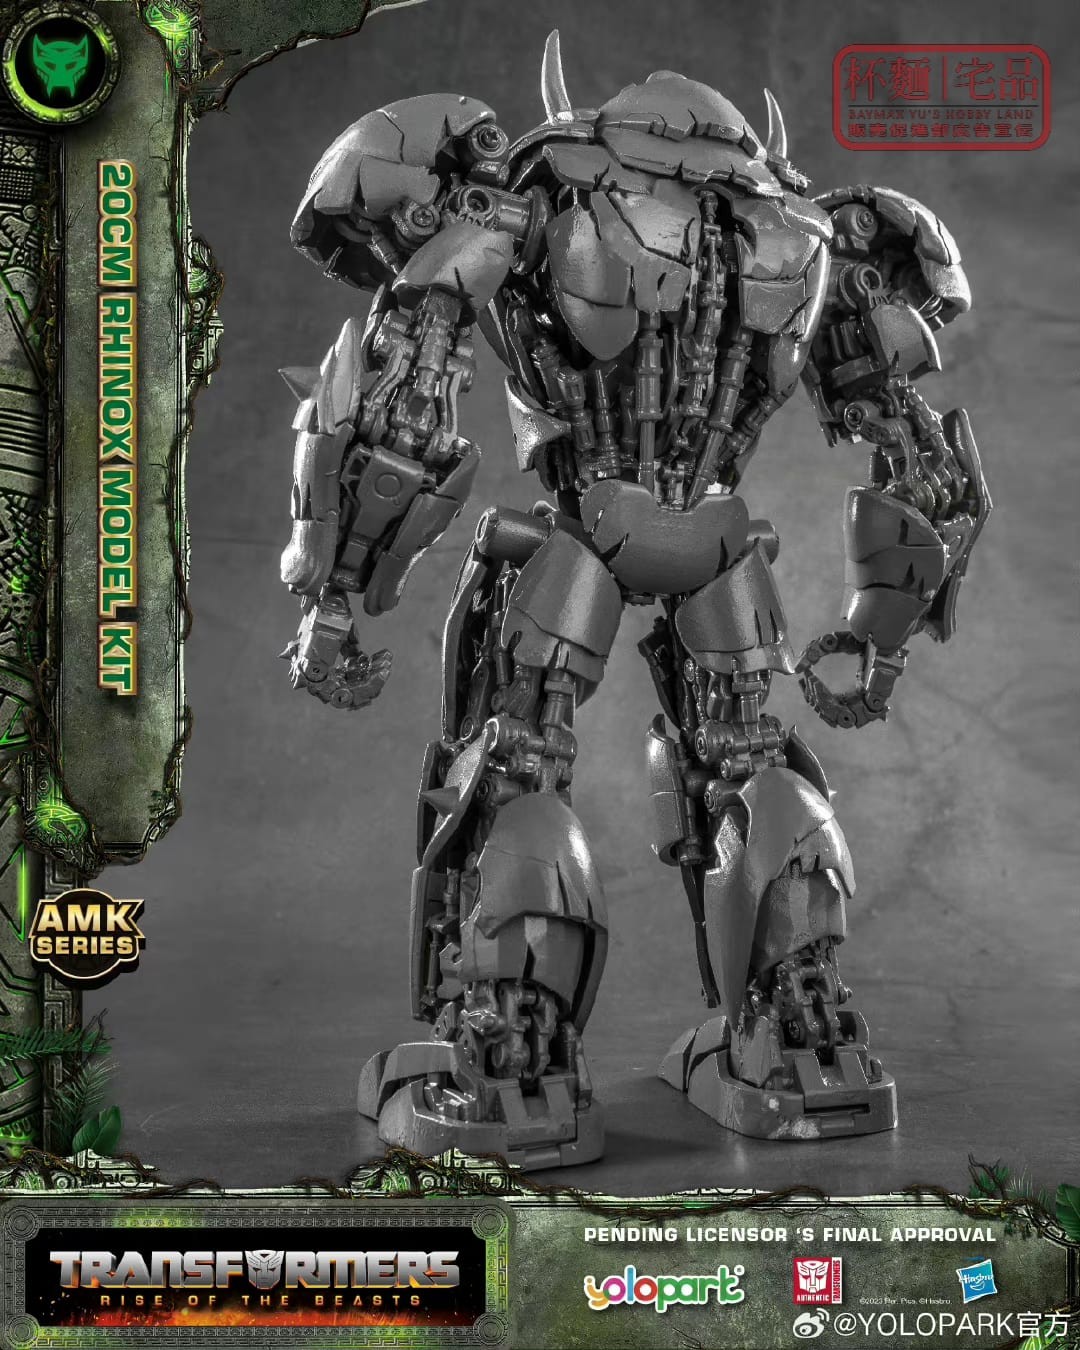 Yolopark Rise Of The Beasts Model Kits, Page 148